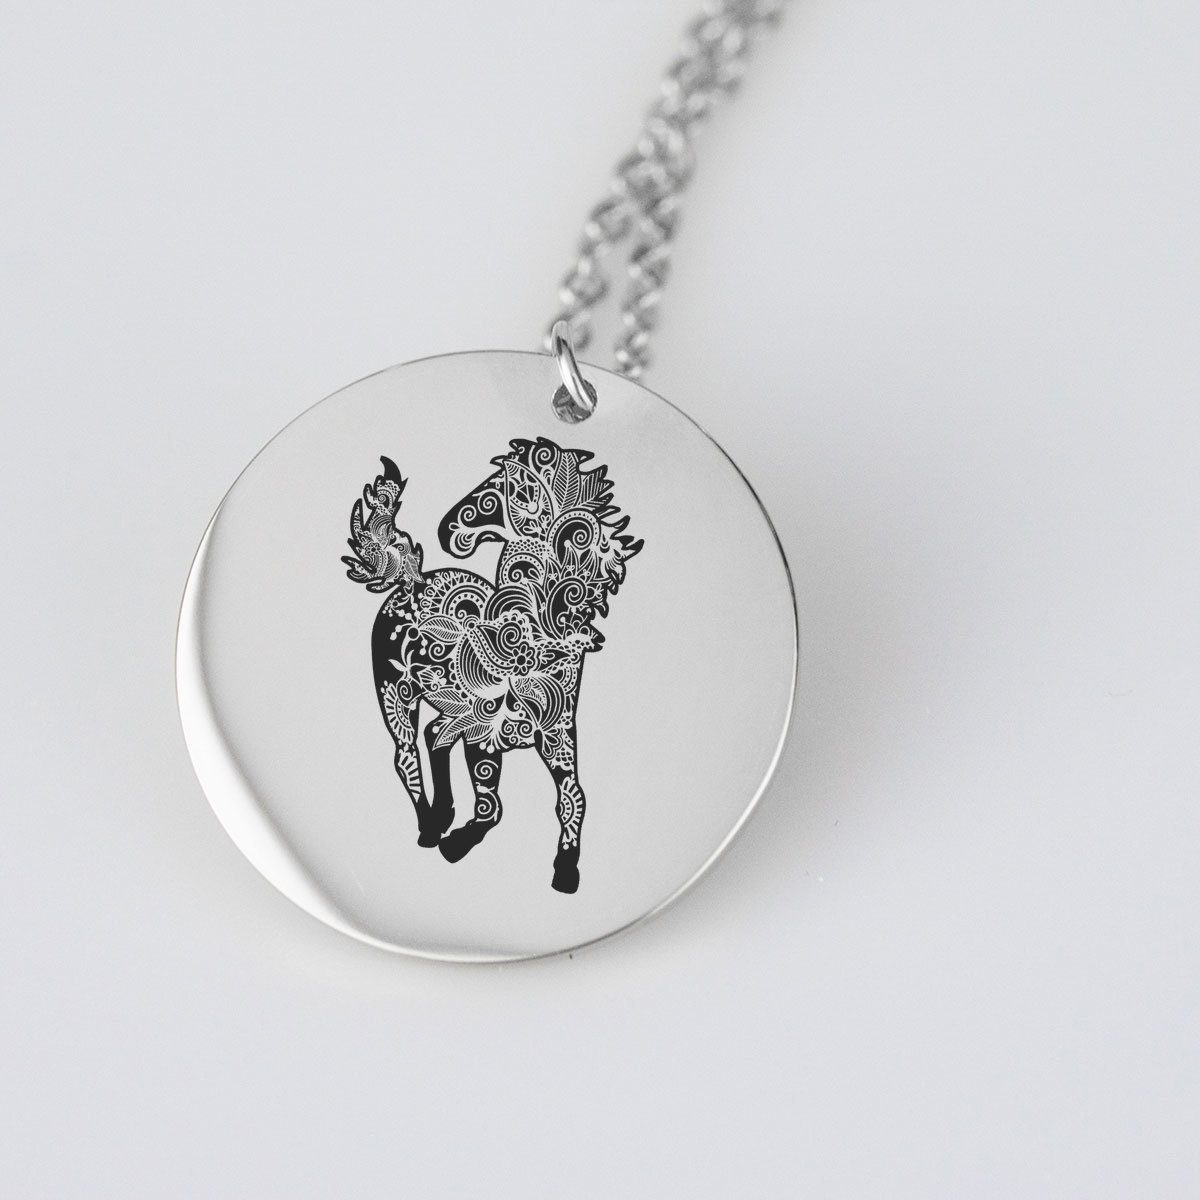 Wild Horse Silhouette Charm Necklace